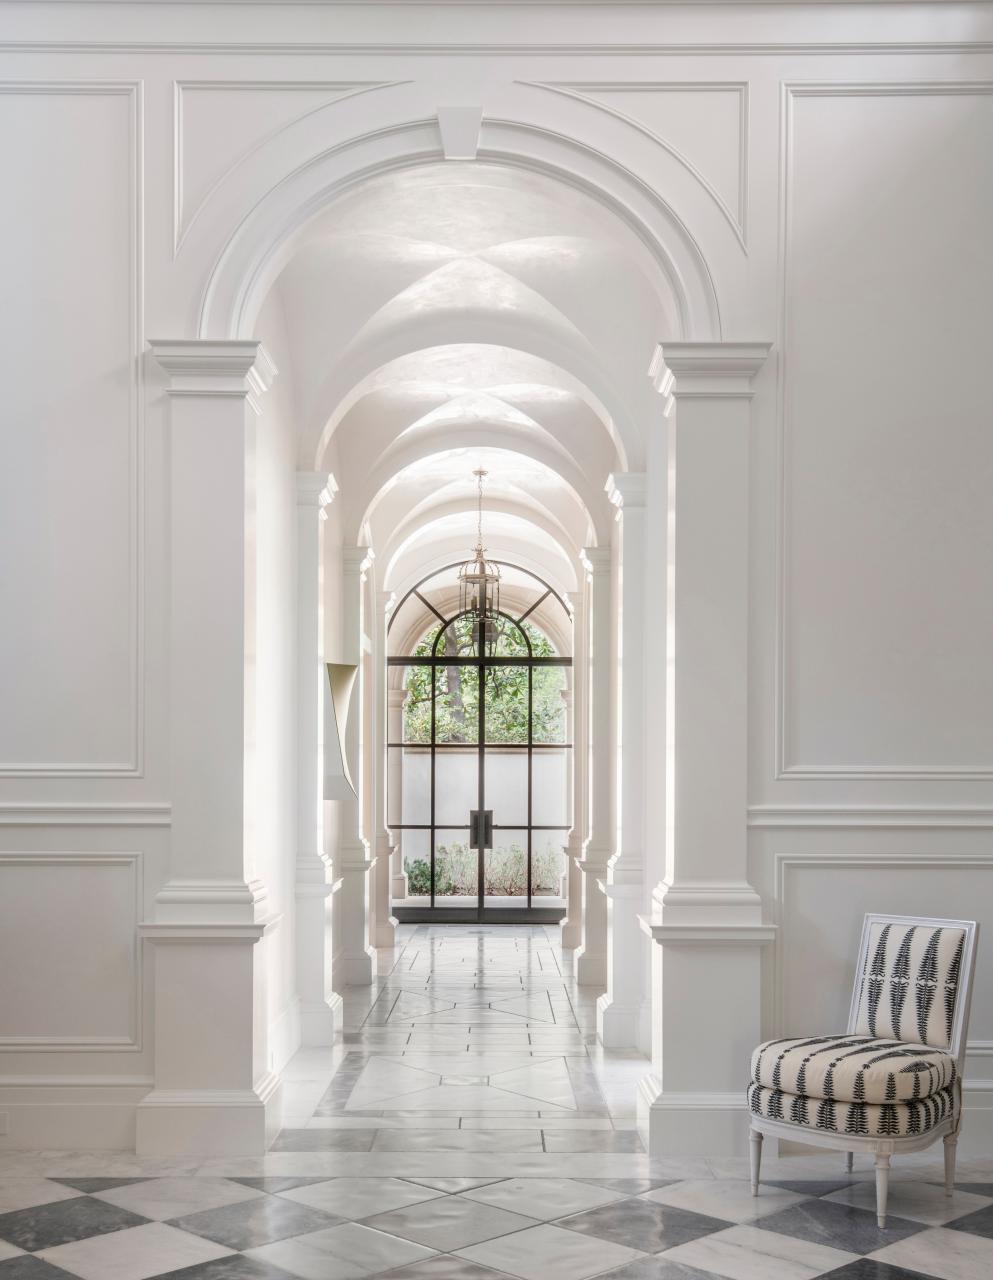 Neoclassical Interior Design Is Timeless and Traditional: Get the Look